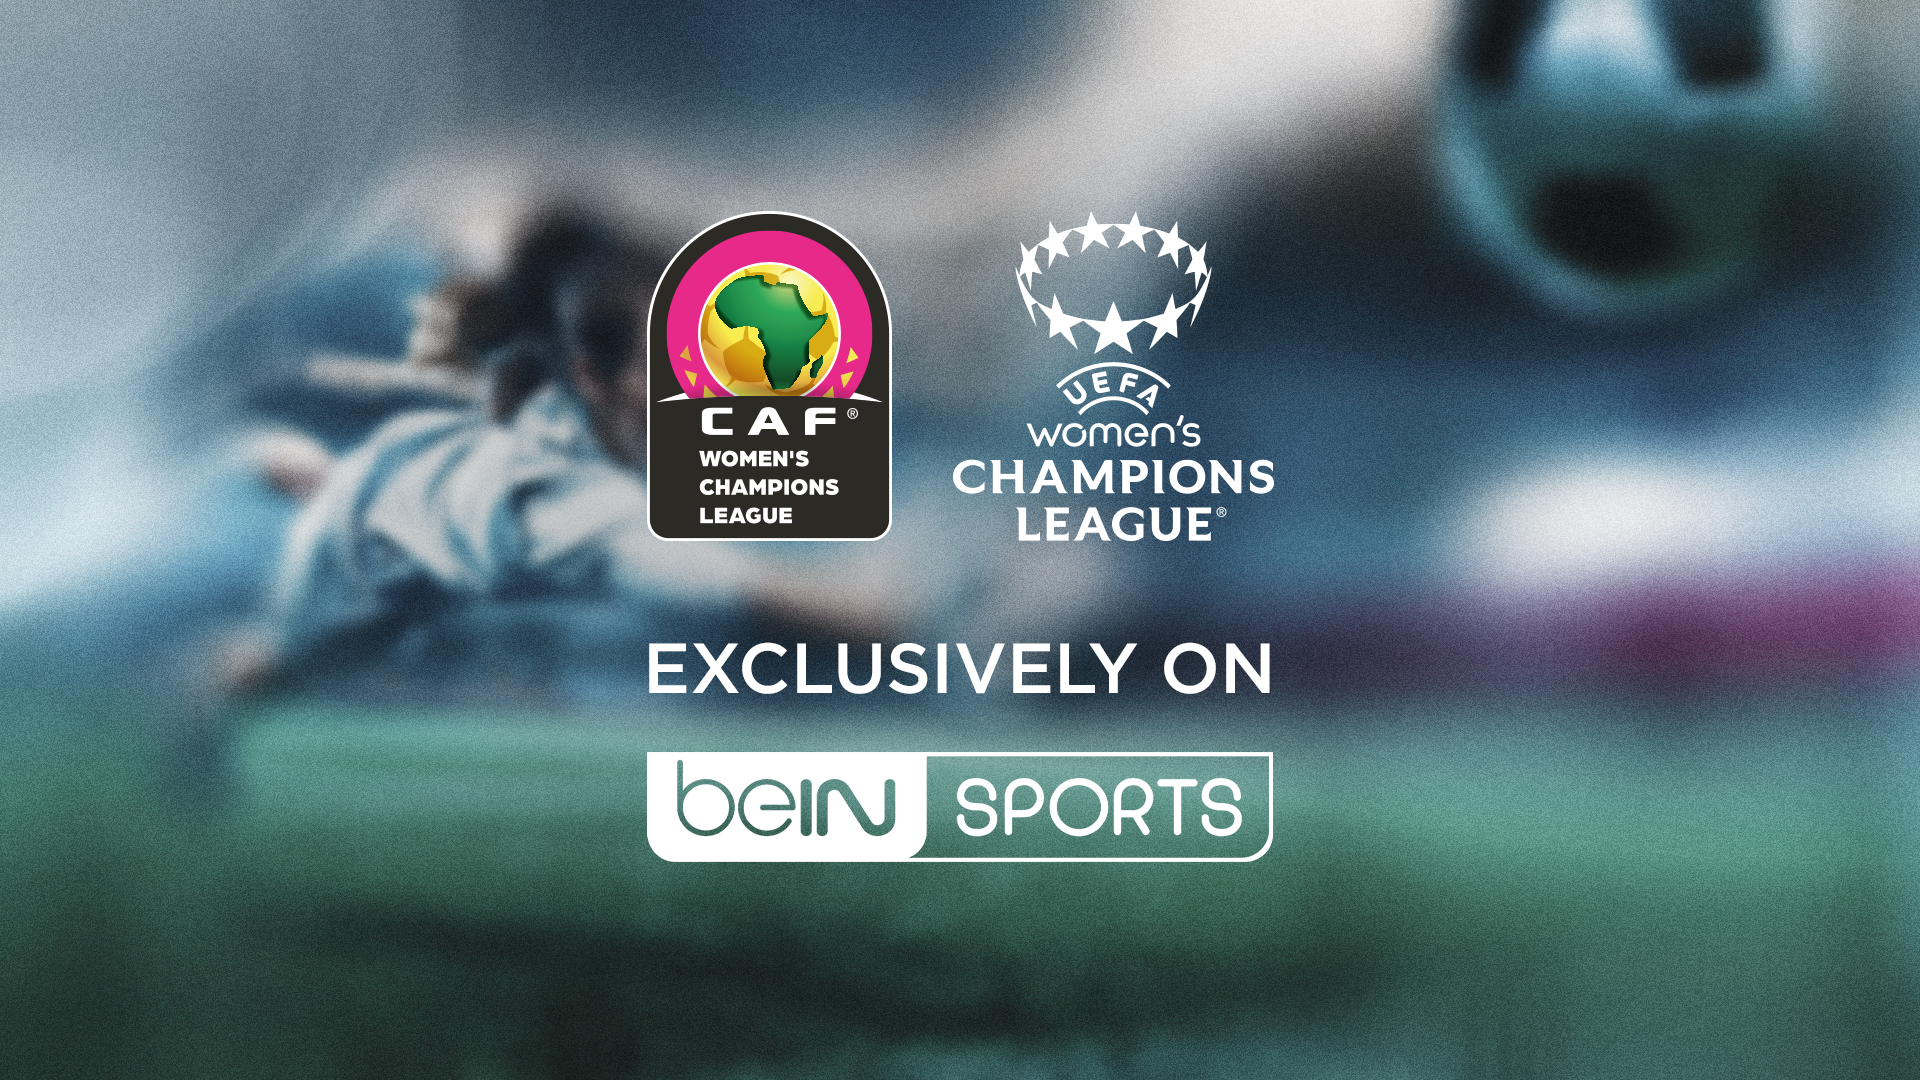 beIN SPORTS Further Demonstrates Commitment to Womens Football with Live Coverage of UEFA and CAF Womens Champions Leagues beIN SPORTS